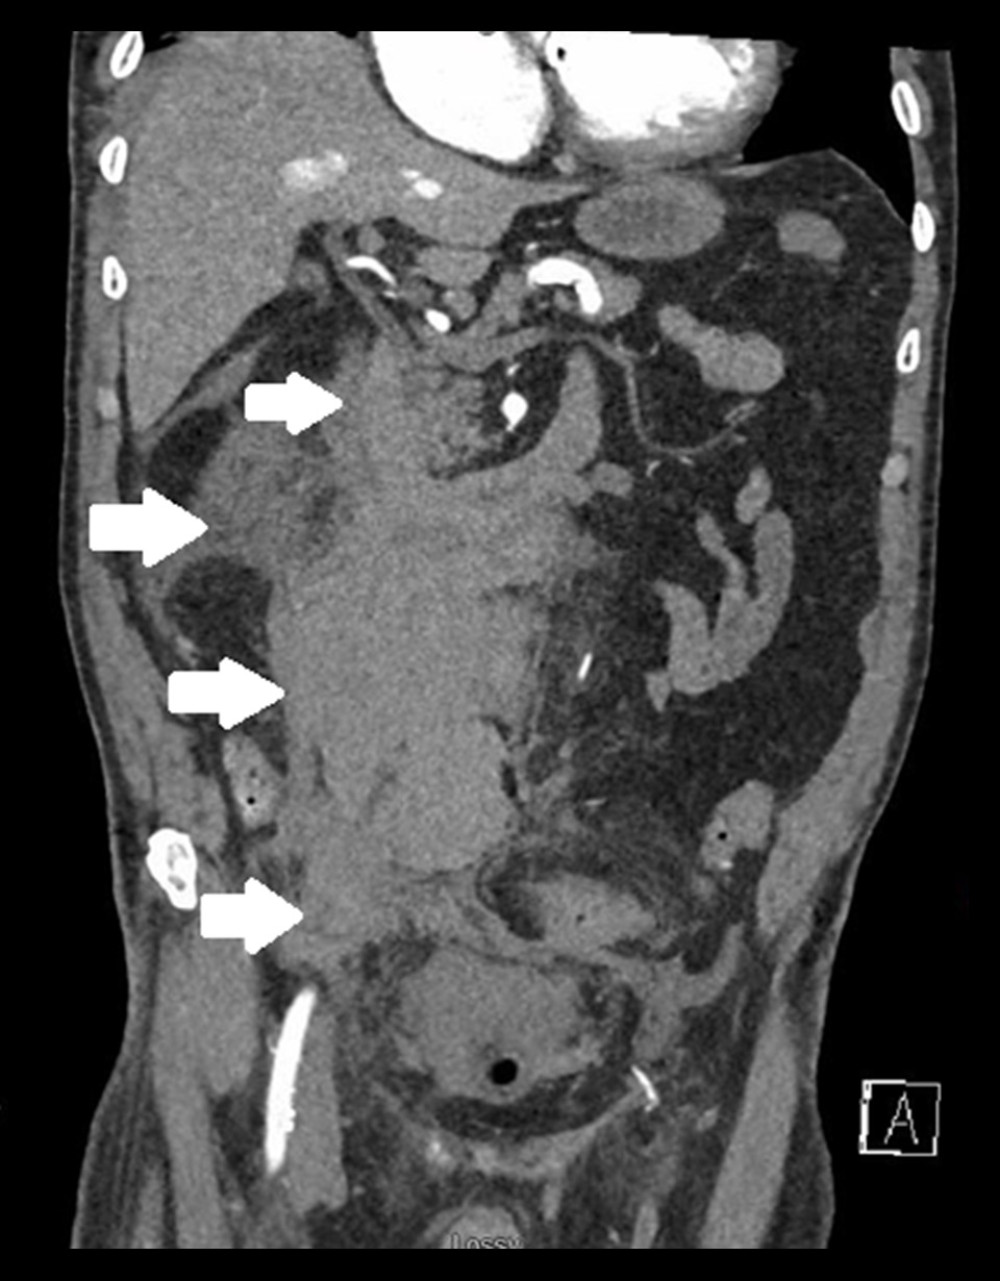 Initial presenting imaging of retroperitoneal hematoma. Coronal imaging of the patient’s presenting CTA scan demonstrating a poorly-defined hematoma beginning in the right hemi-abdomen near the duodenum and expanding inferiorly towards the pelvis, indicated by white arrows.